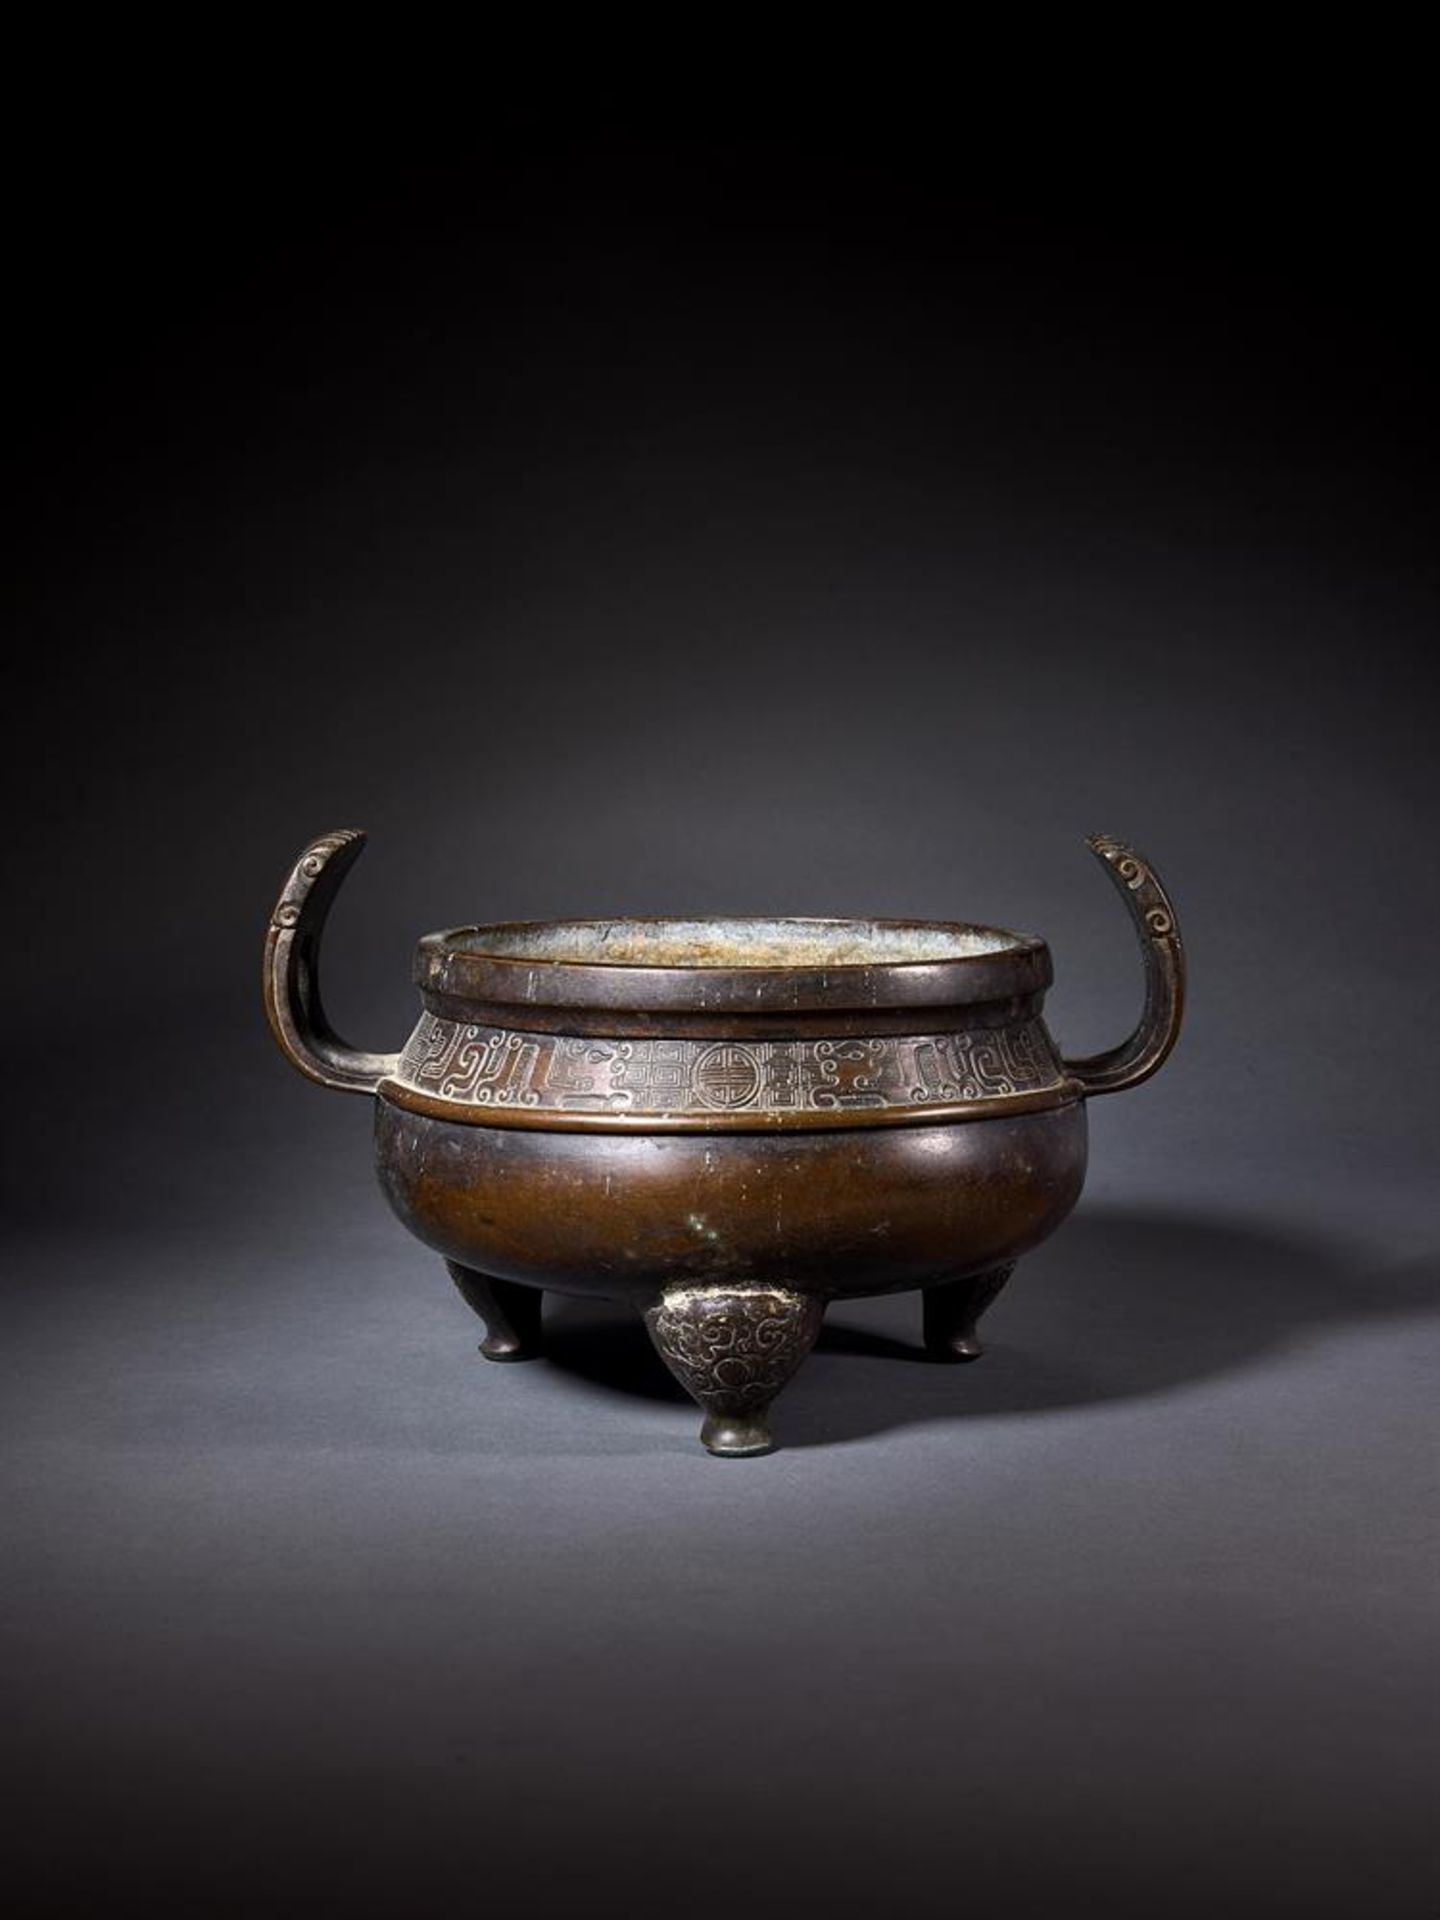 A CHINESE BRONZE TRIPOD CENSER, 17TH OR 18TH CENTURY